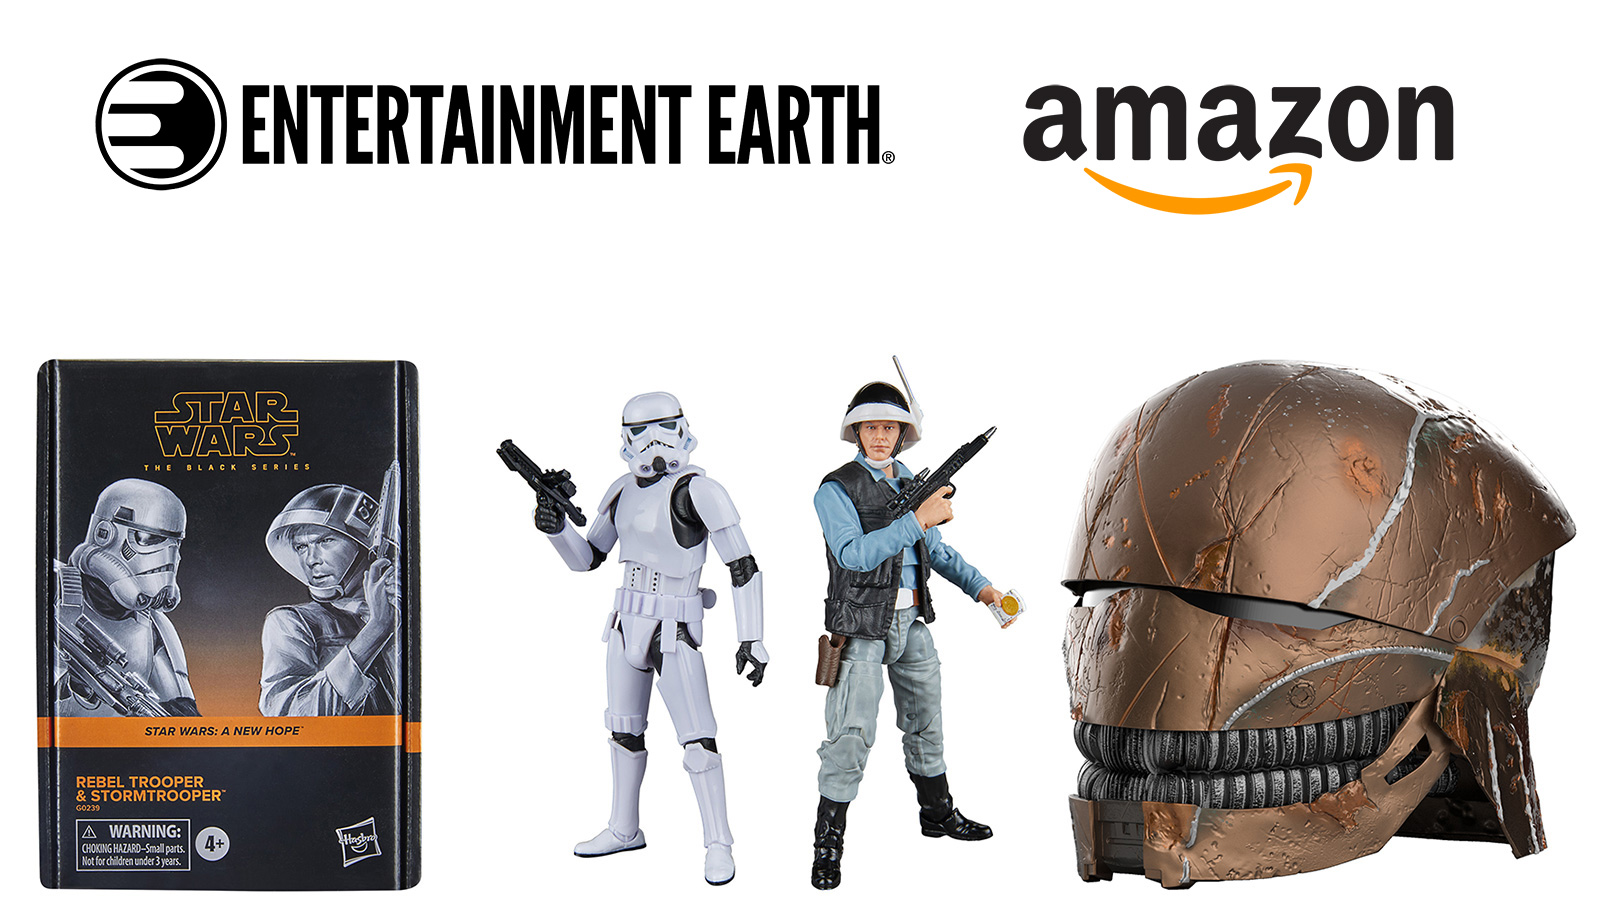 Preorder Now At Amazon And Entertainment Earth - TBS Rebel Trooper & Stormtrooper Set And The Stranger Helmet